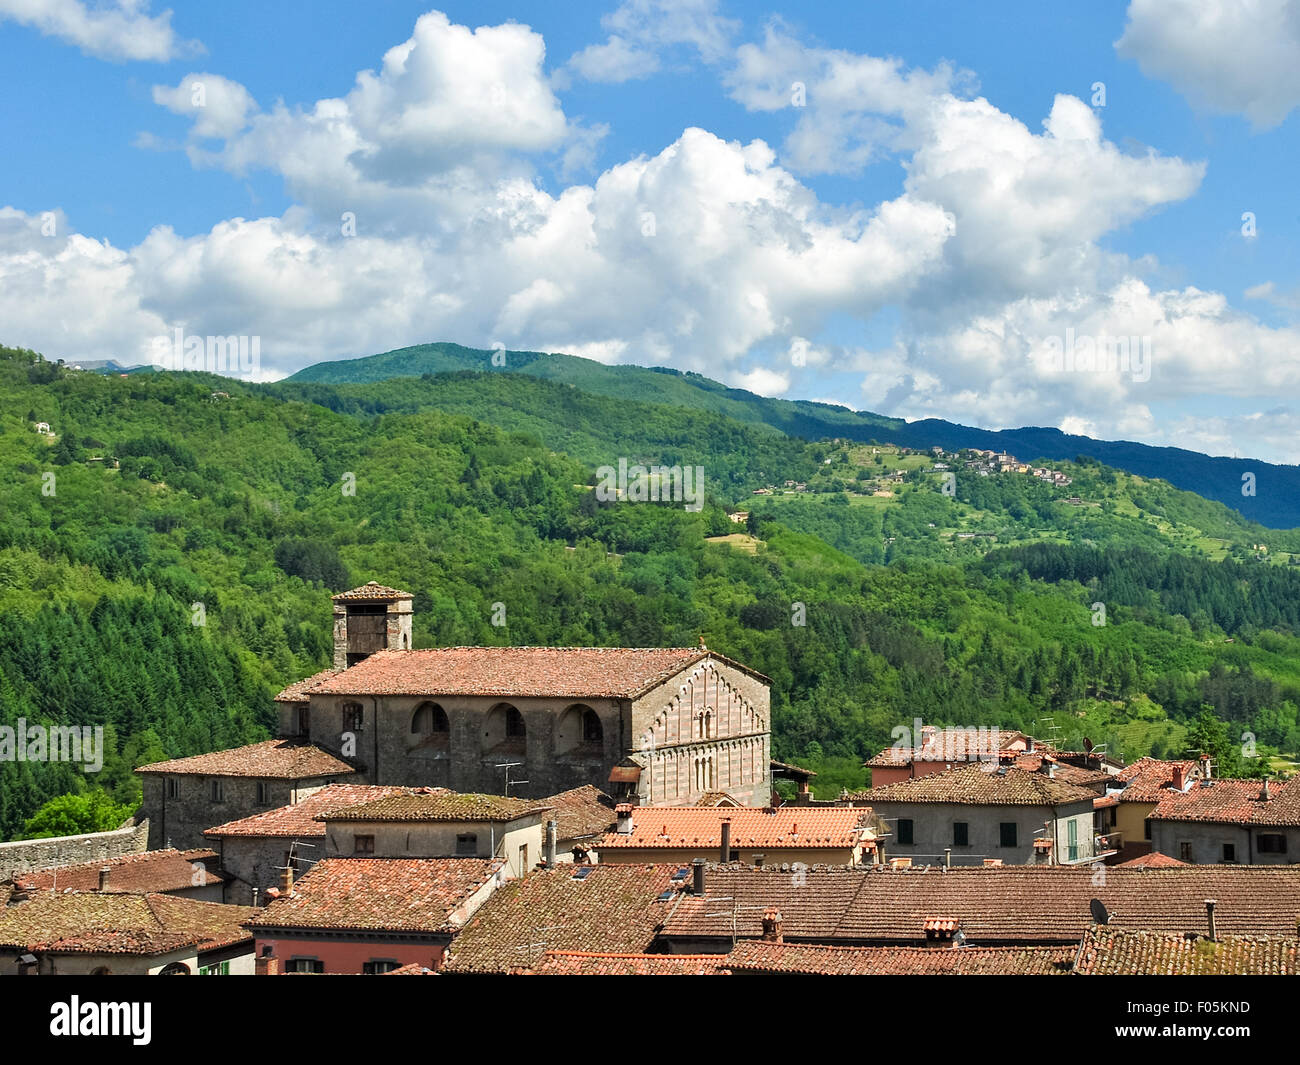 View of Castiglione di Garfagnana, a small town in Tuscany (Italy), with surrounding hills in background Stock Photo